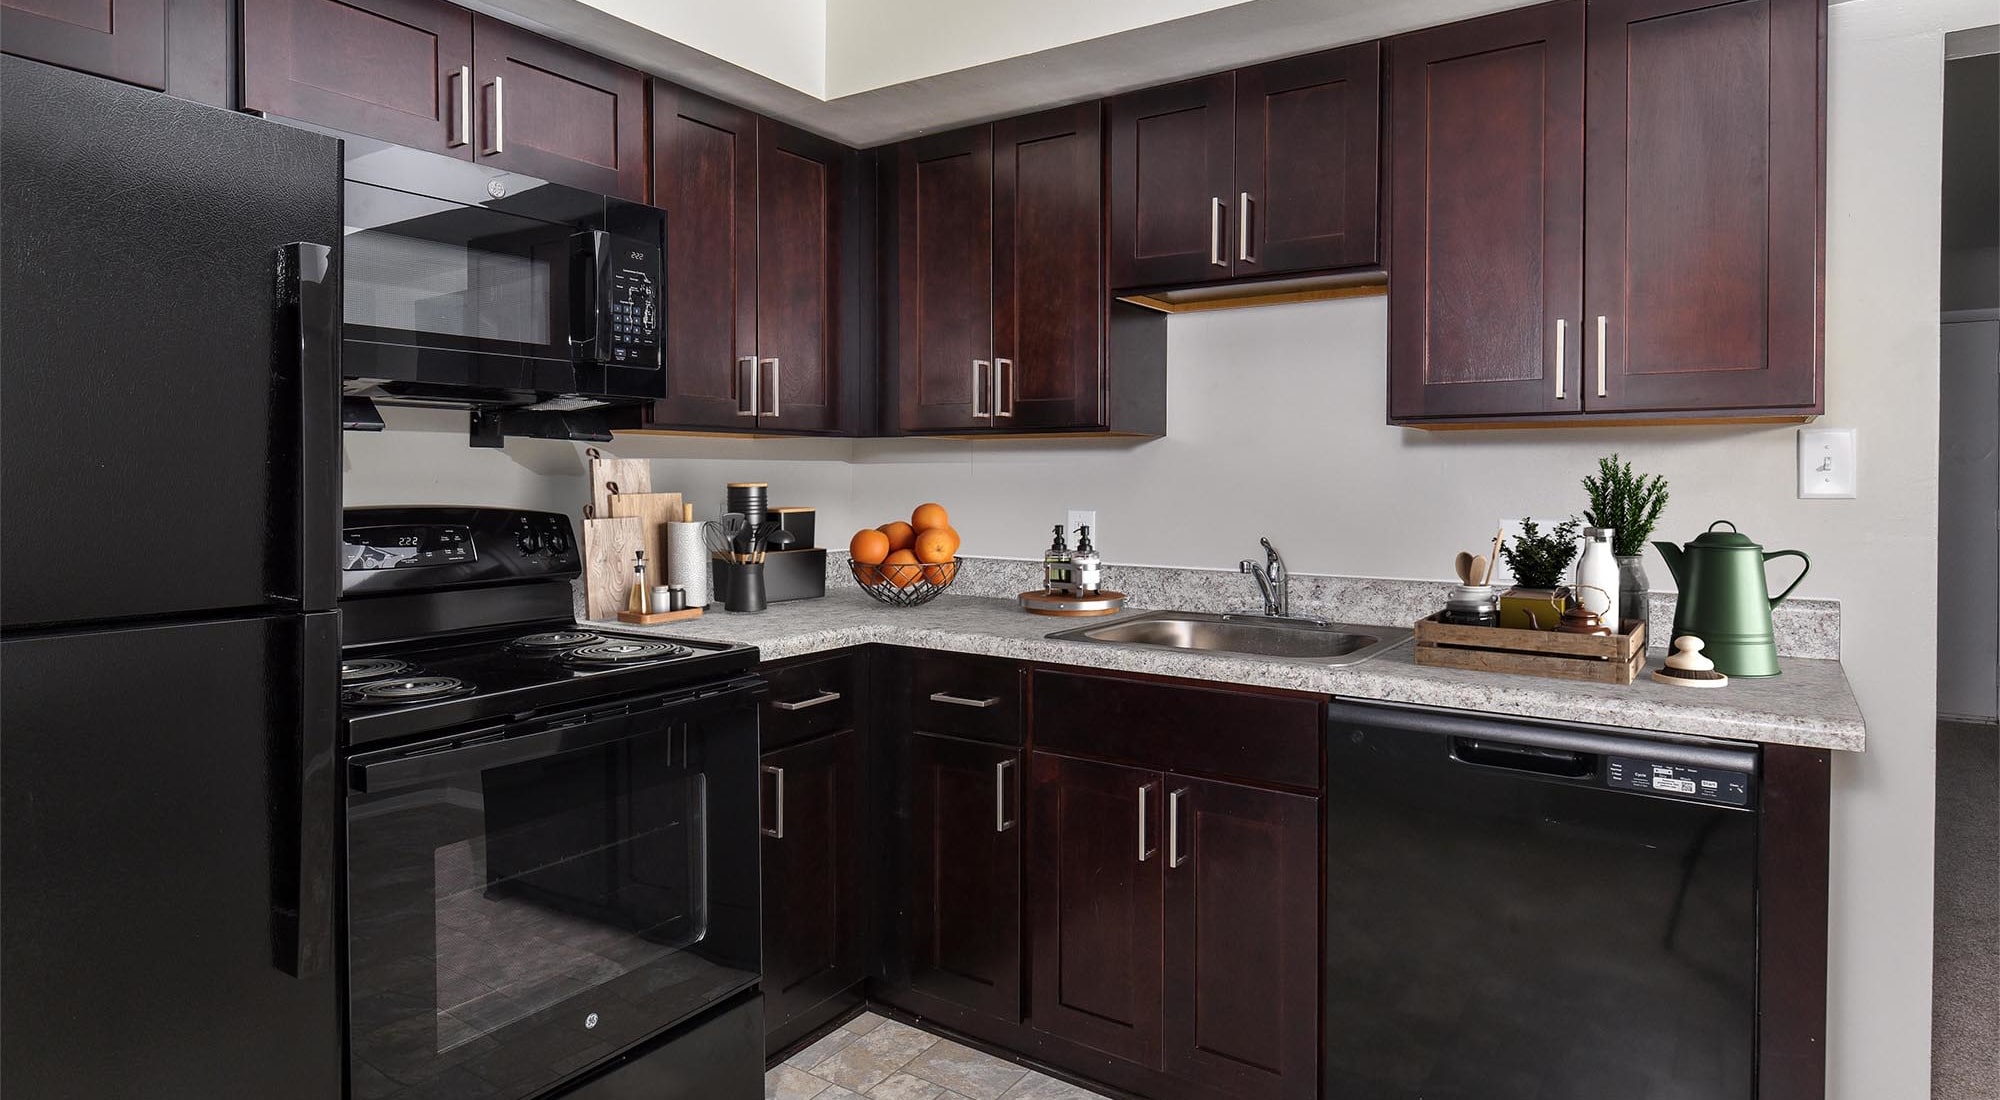 Model kitchen in an apartment at James River Pointe, Richmond, Virginia